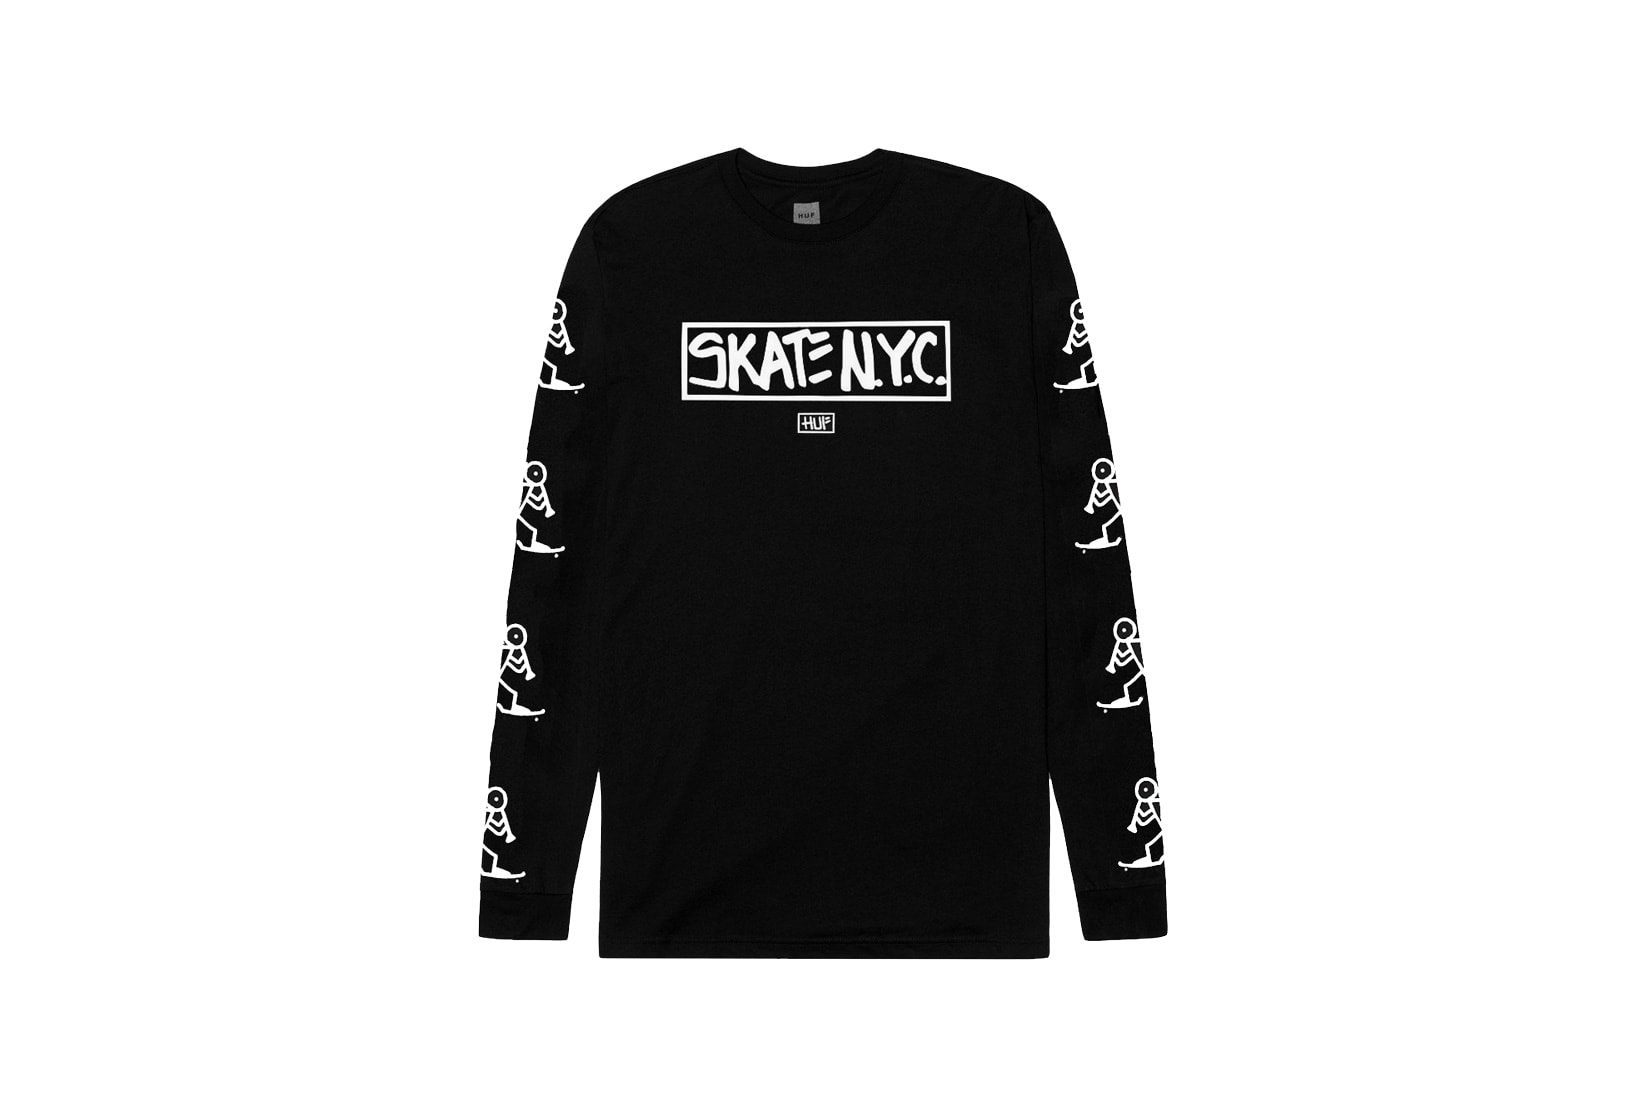 HUF x SKATE NYC 2016 Fall/Winter Collection